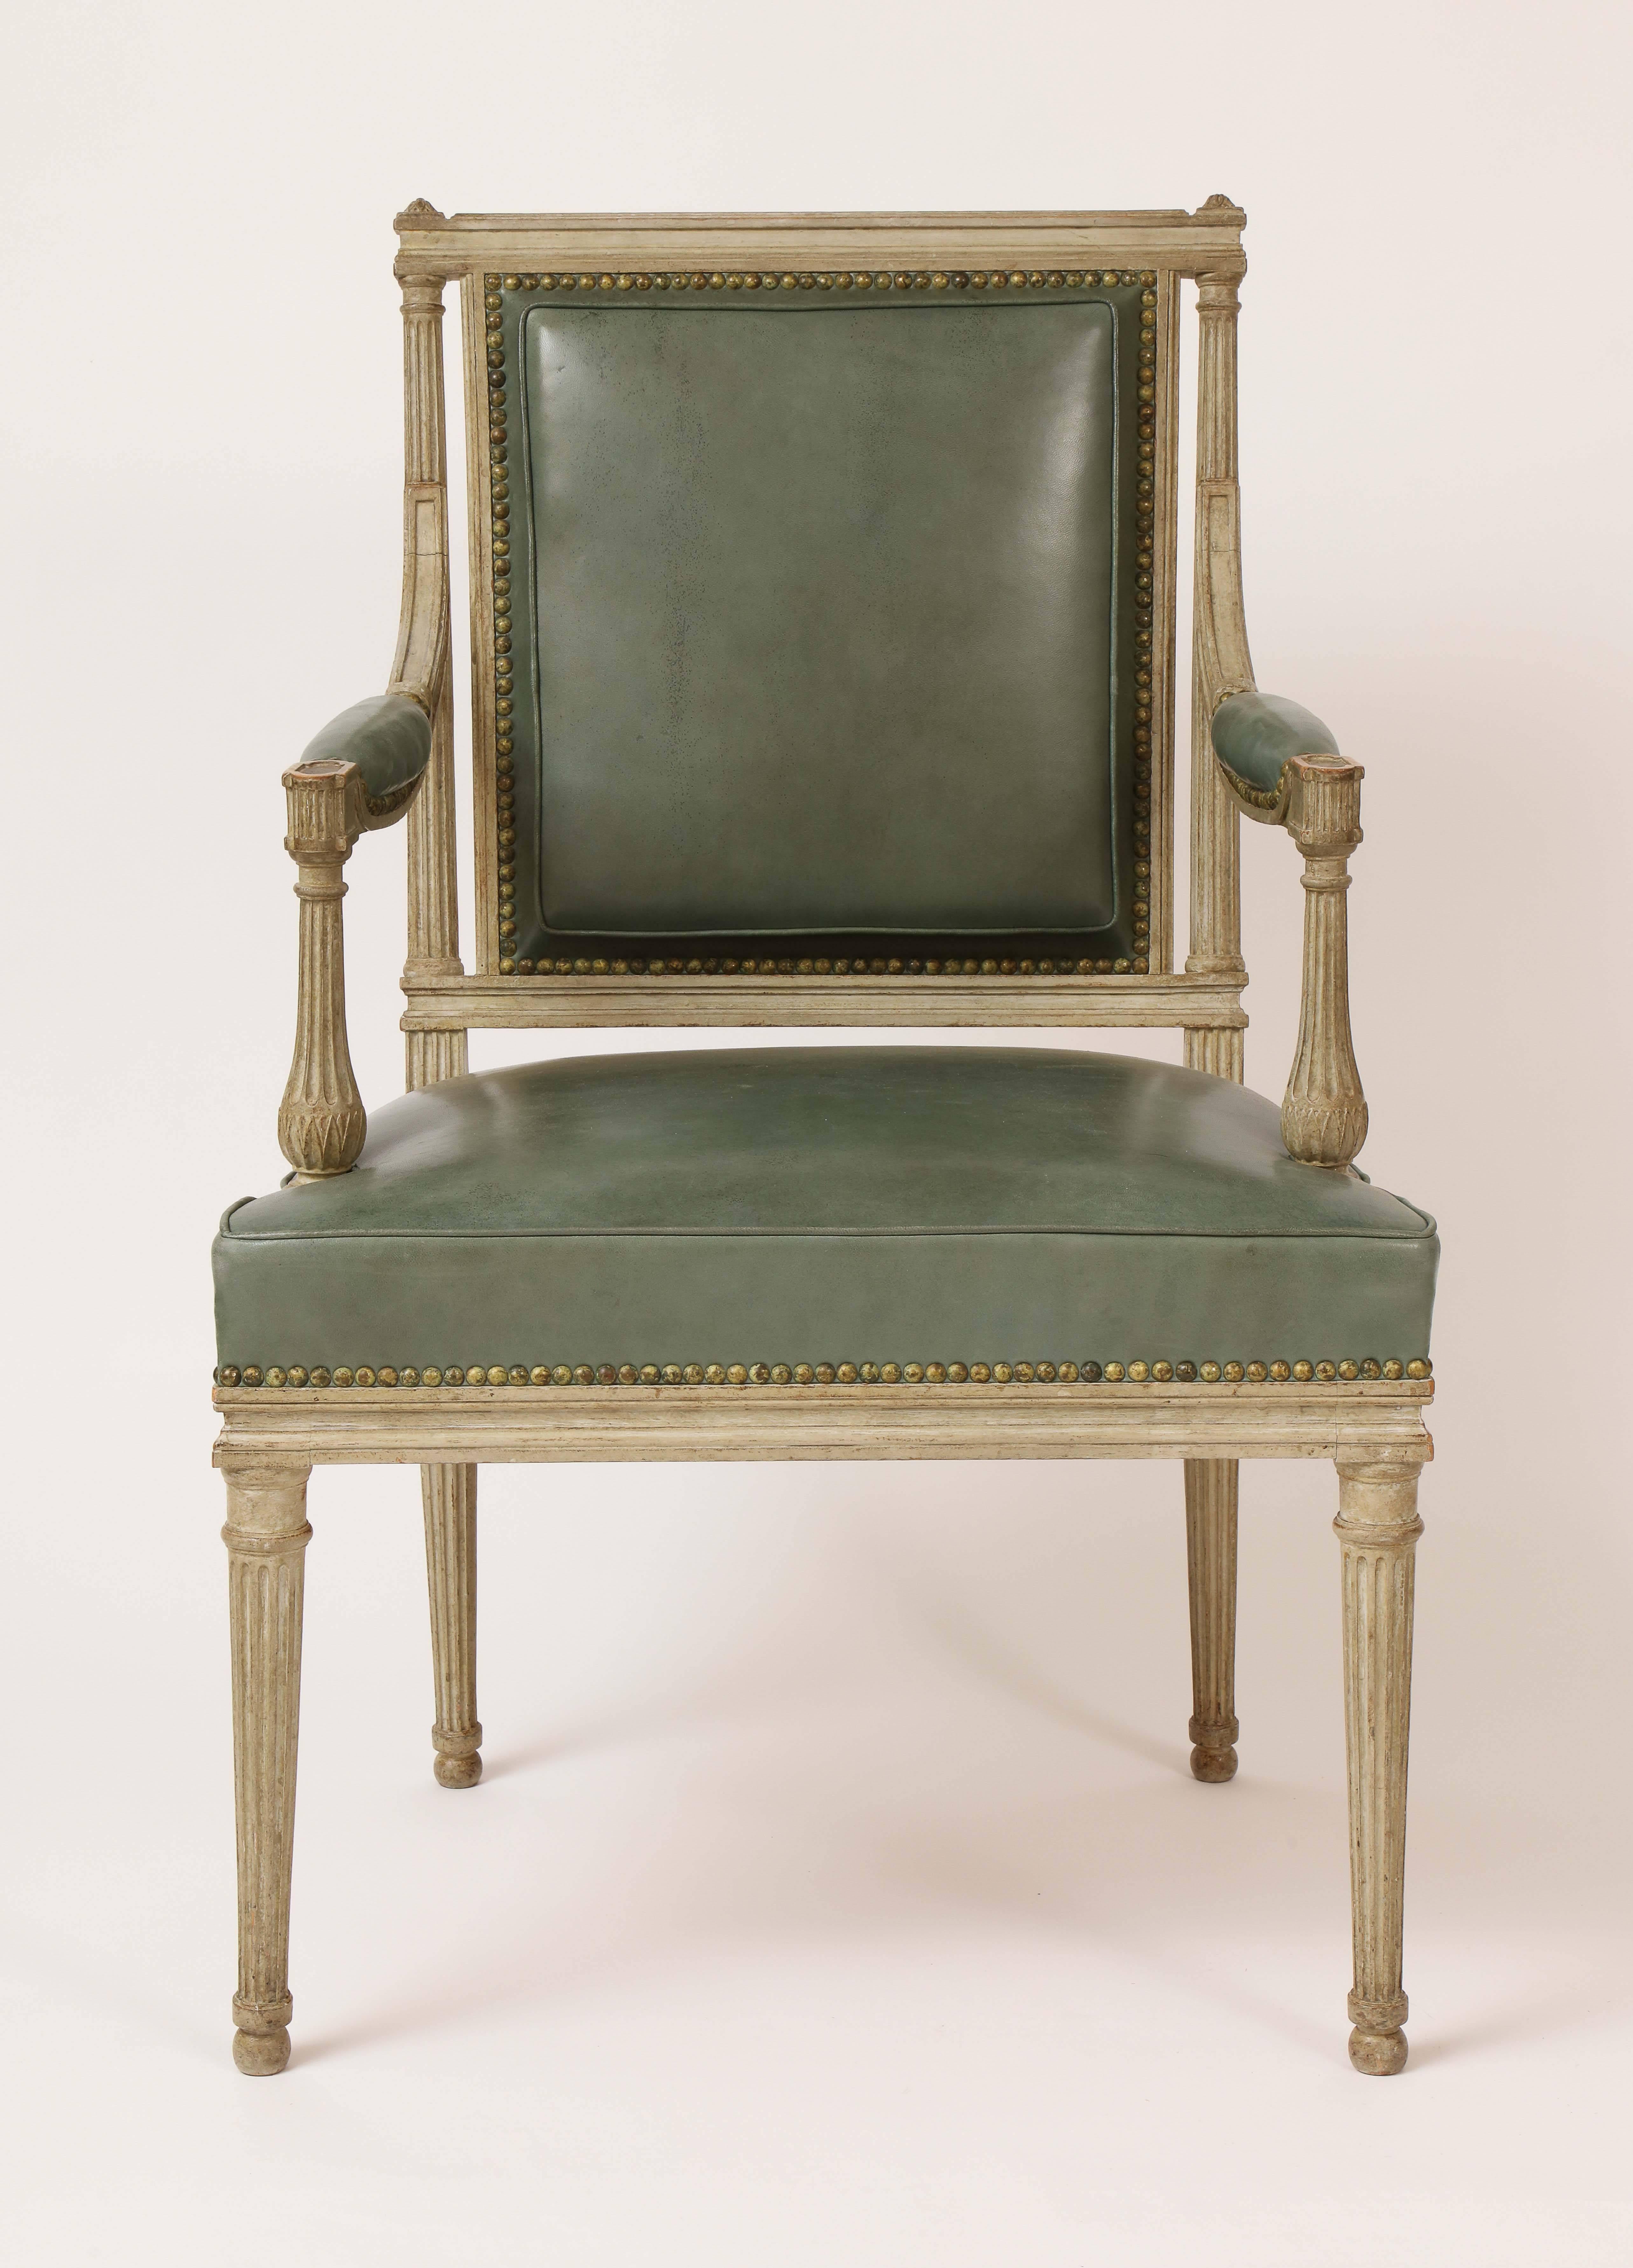 Carved Pair of French Neoclassical Armchairs in the Louis XVI Taste by Madison Jansen